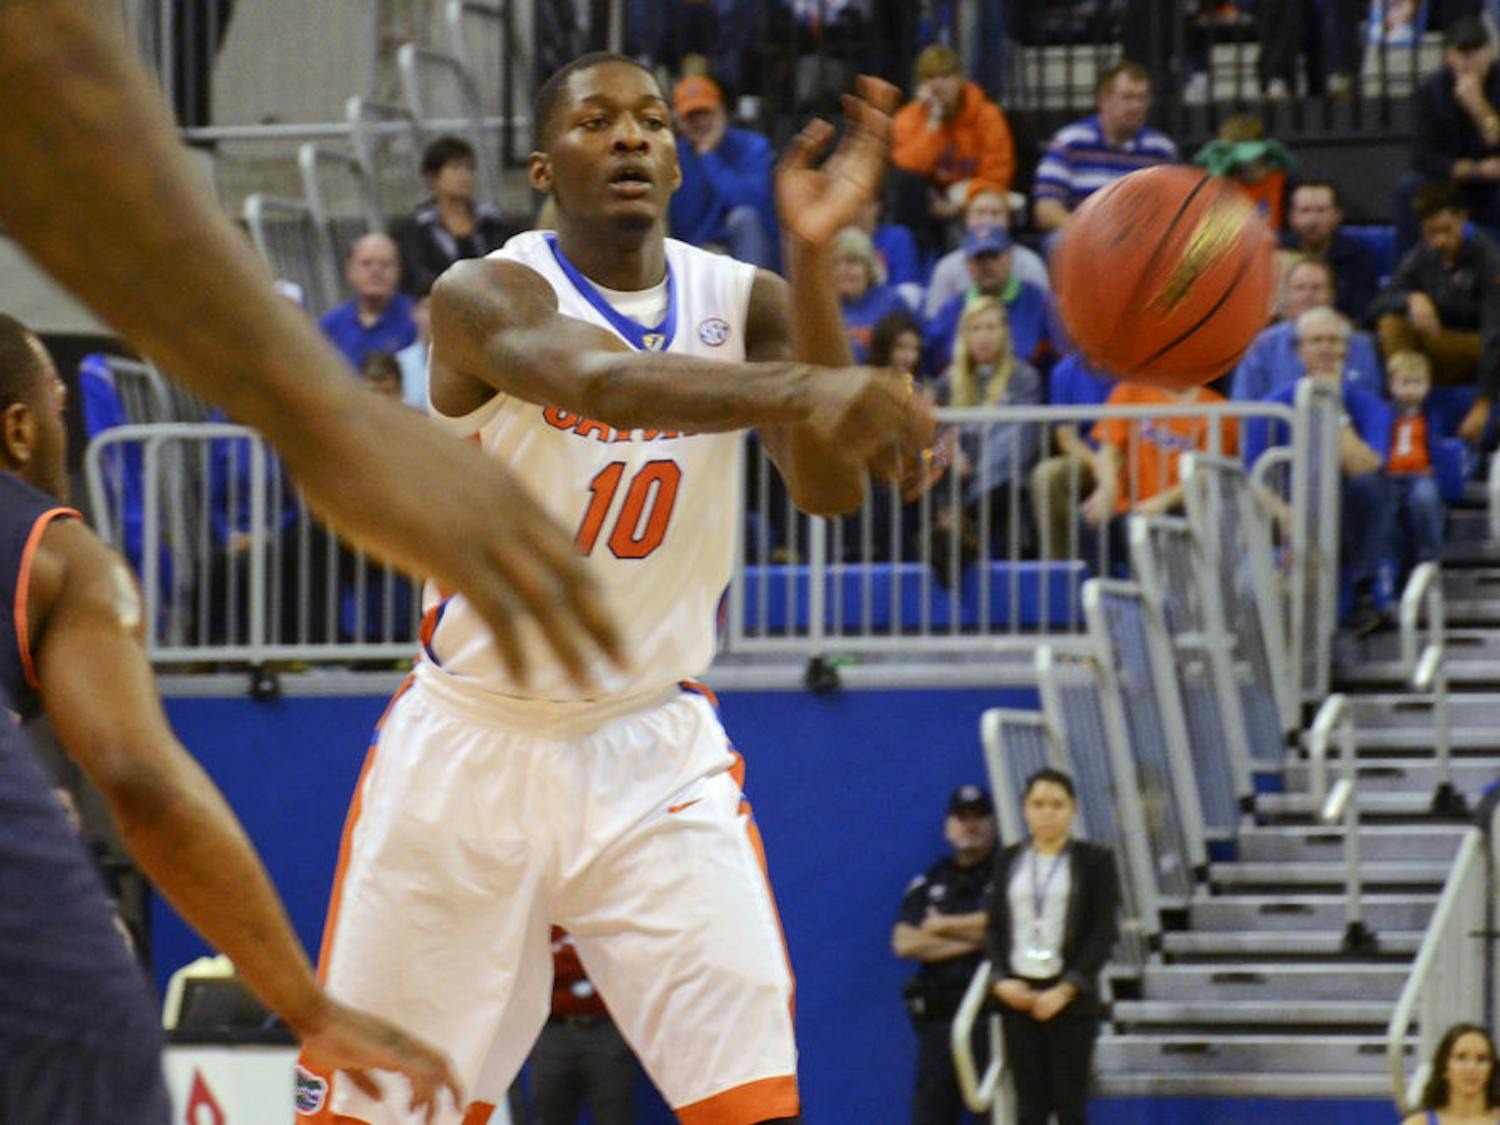 Dorian Finney-Smith passes the ball during Florida's 75-55 win against Auburn on Thursday in the O'Connell Center.